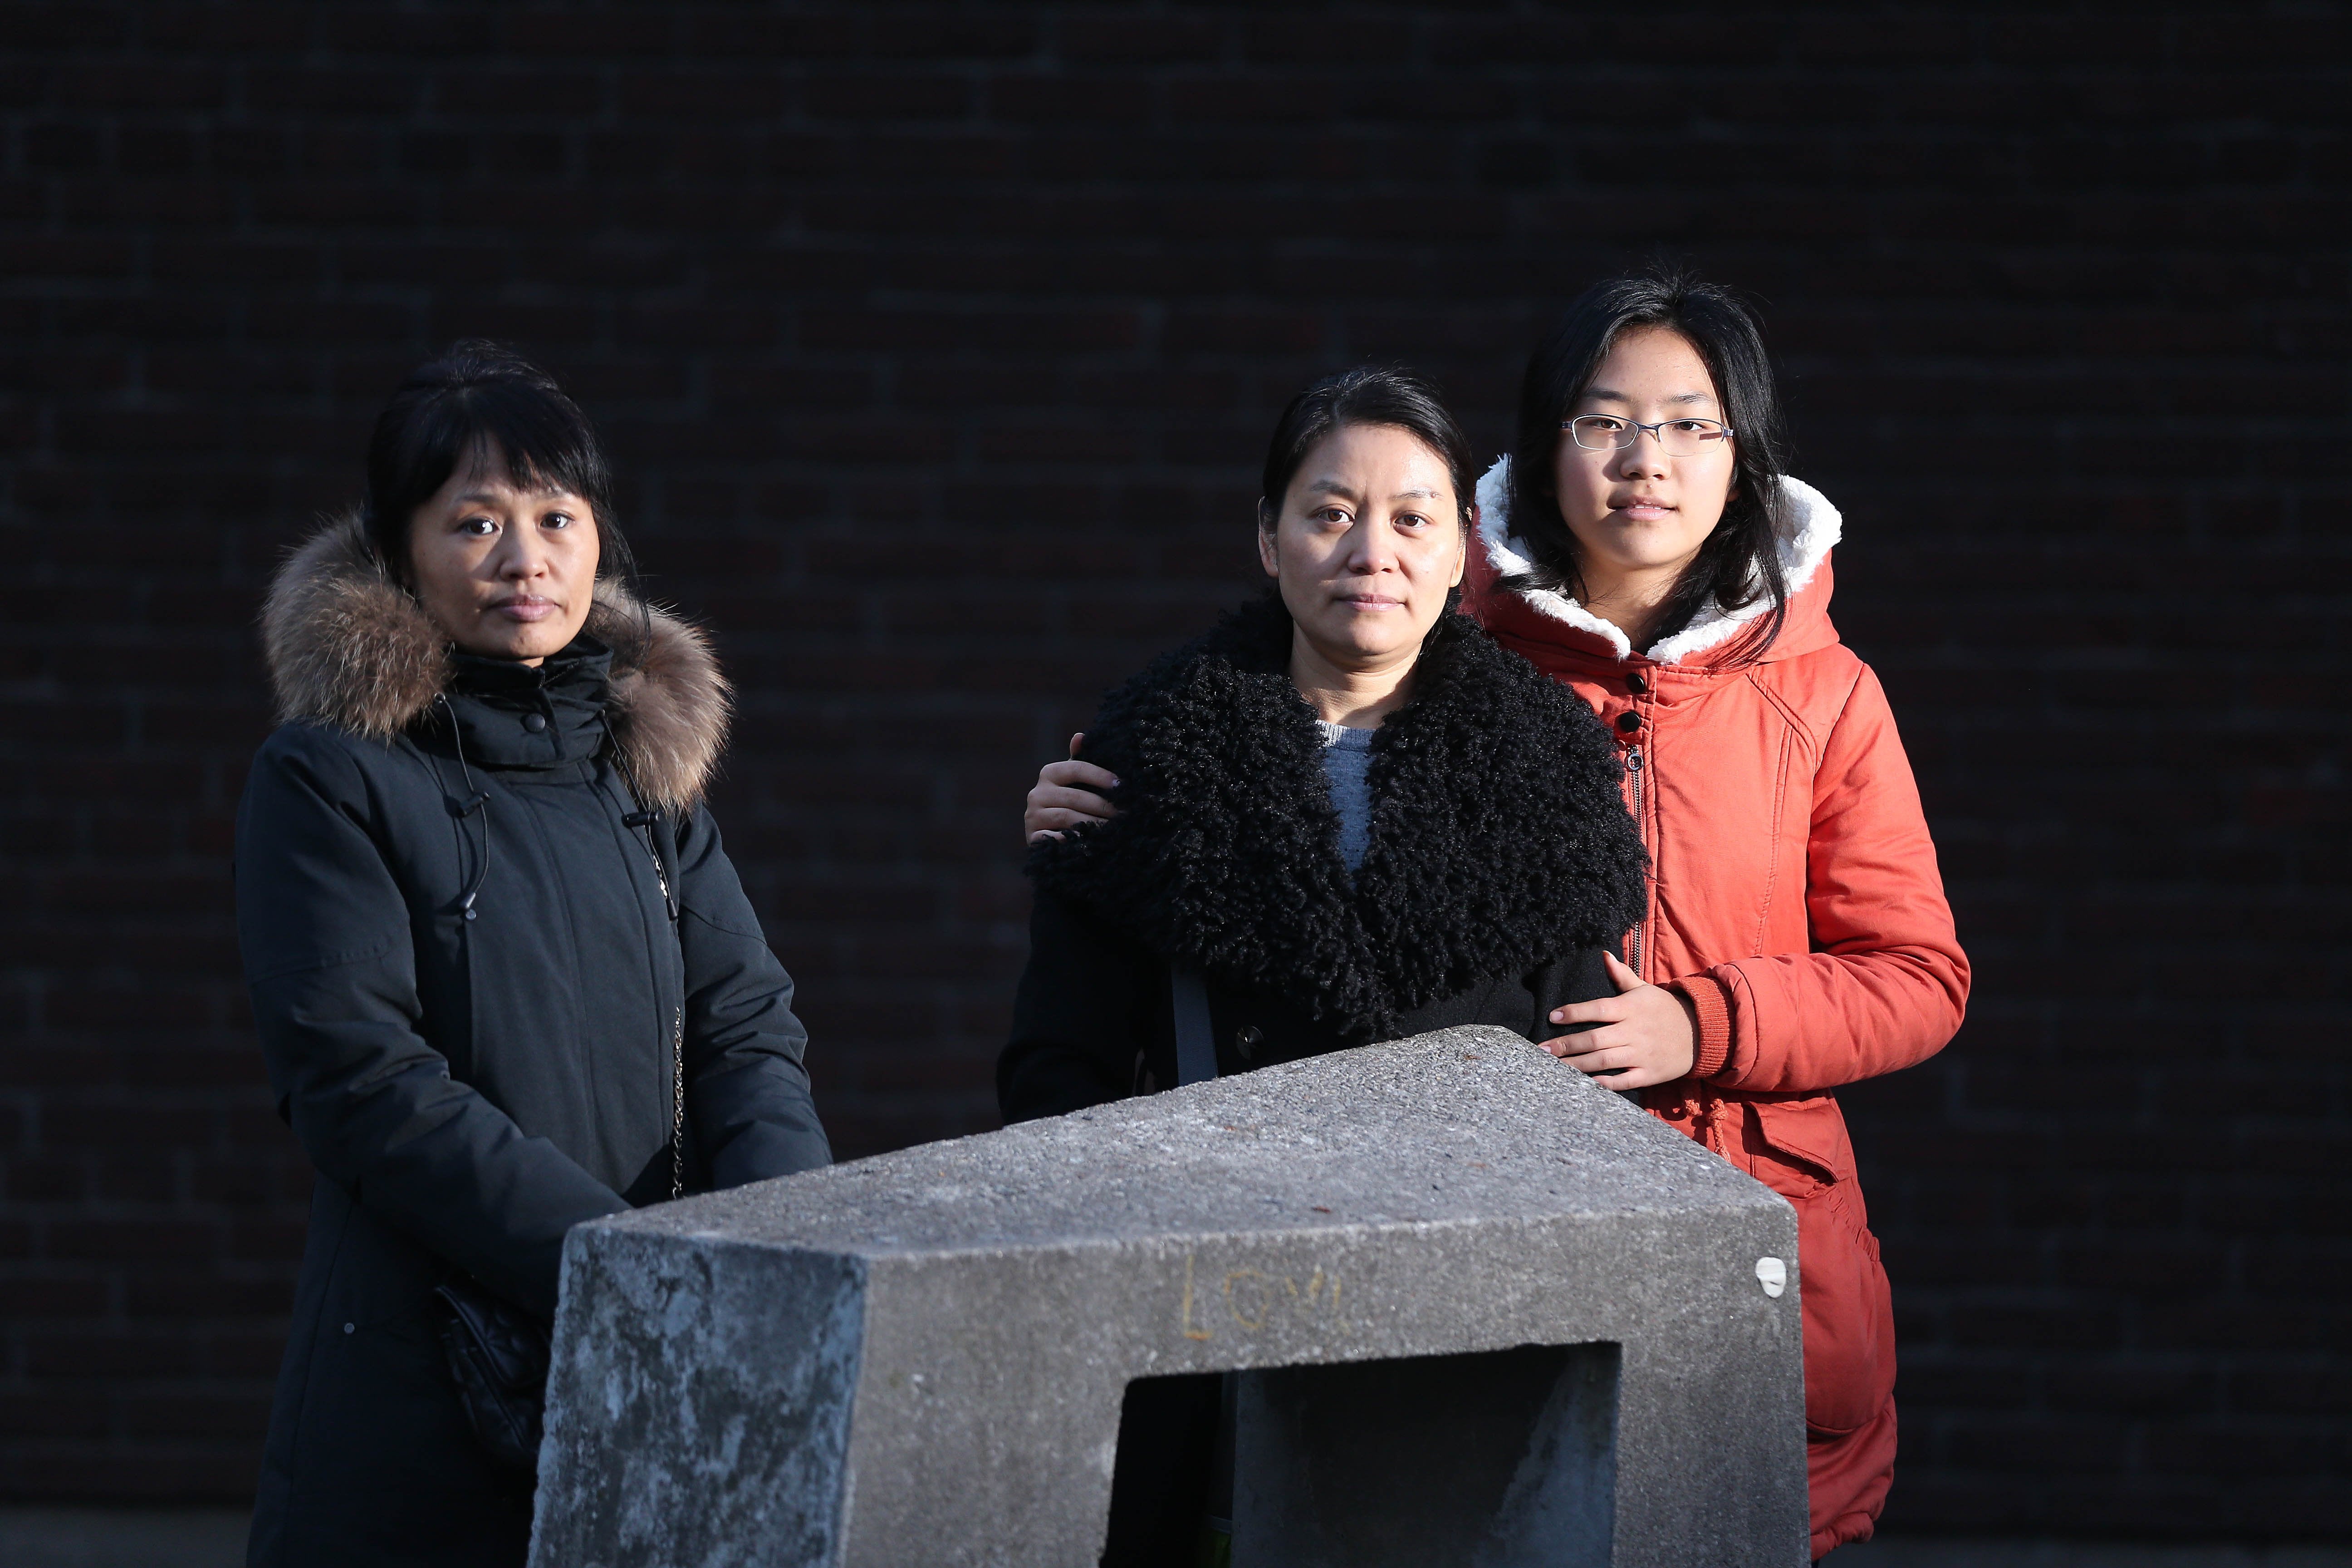 Chu Ling and Gu Shu-hua are the wives of detained Chinese dissidents, Jiang Ye-fei and Dong Guang-ping. They were brought to Canada for protection from Thailand, where the two men were arrested and deported to China, despite having UN refugee status, Toronto, Canada, December 8, 2015. 